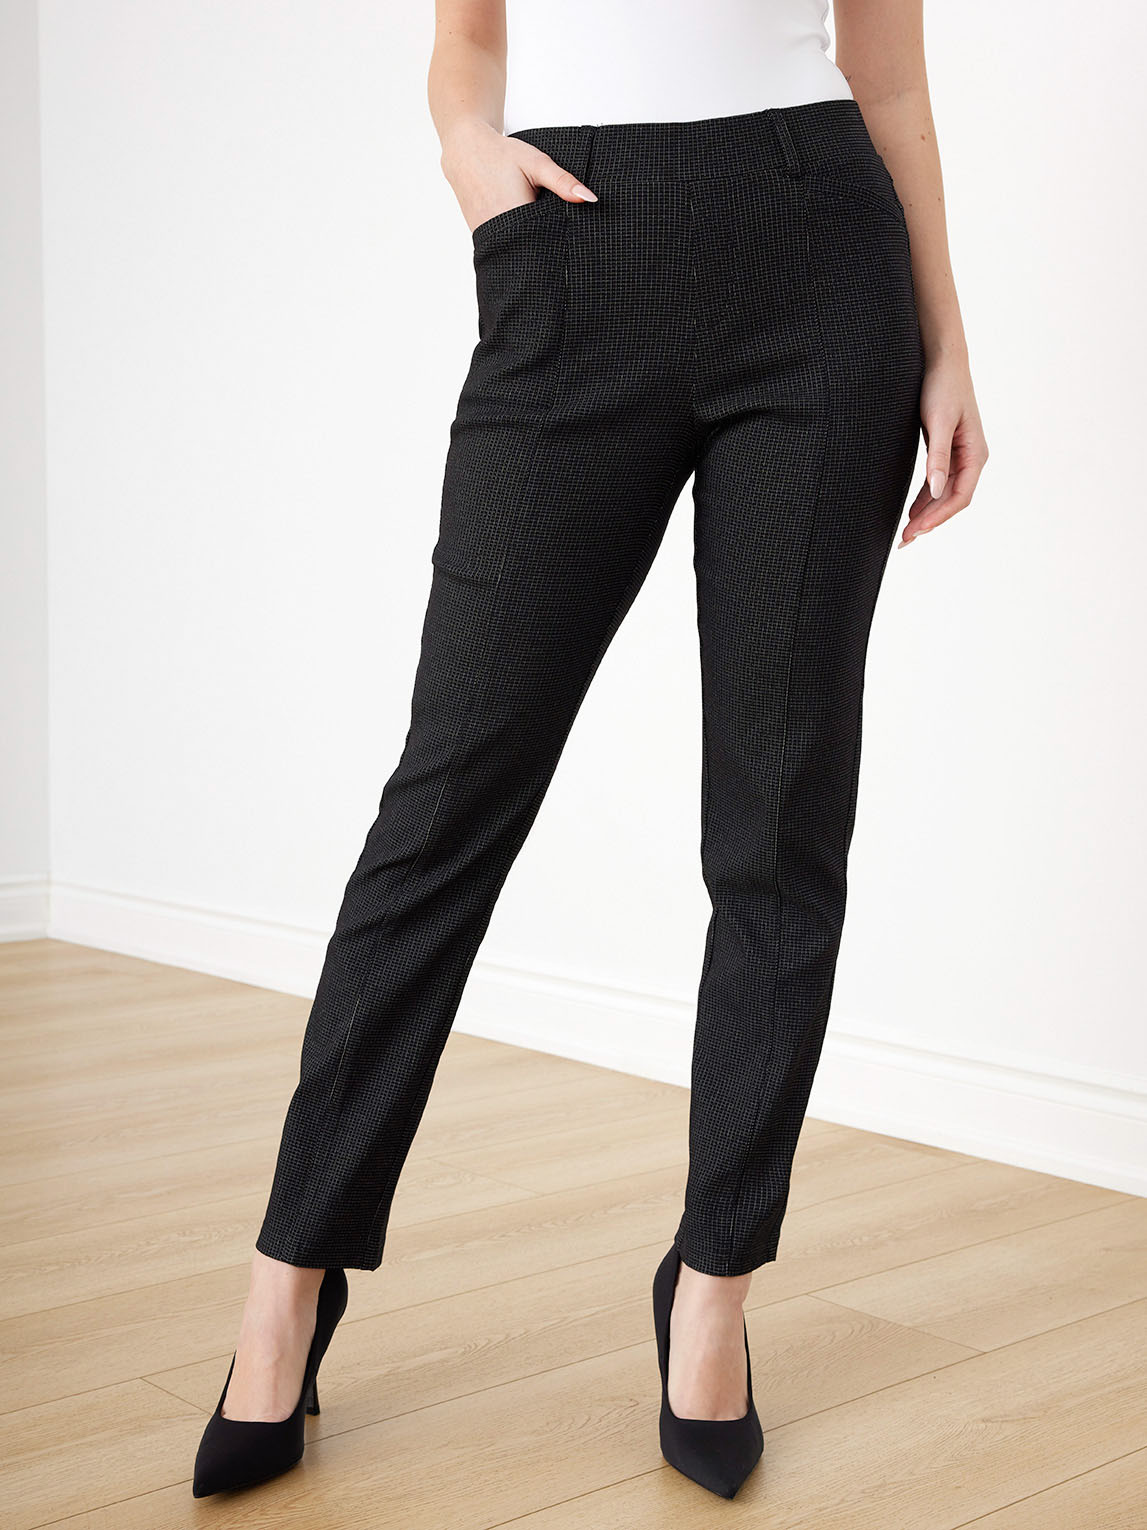 High Waist Plaid Plaid Pants Women With Pockets For Business And Casual  Wear Elegant And Slimming Work Wear For Women, Plus Size Available 210915  From Bai05, $10.23